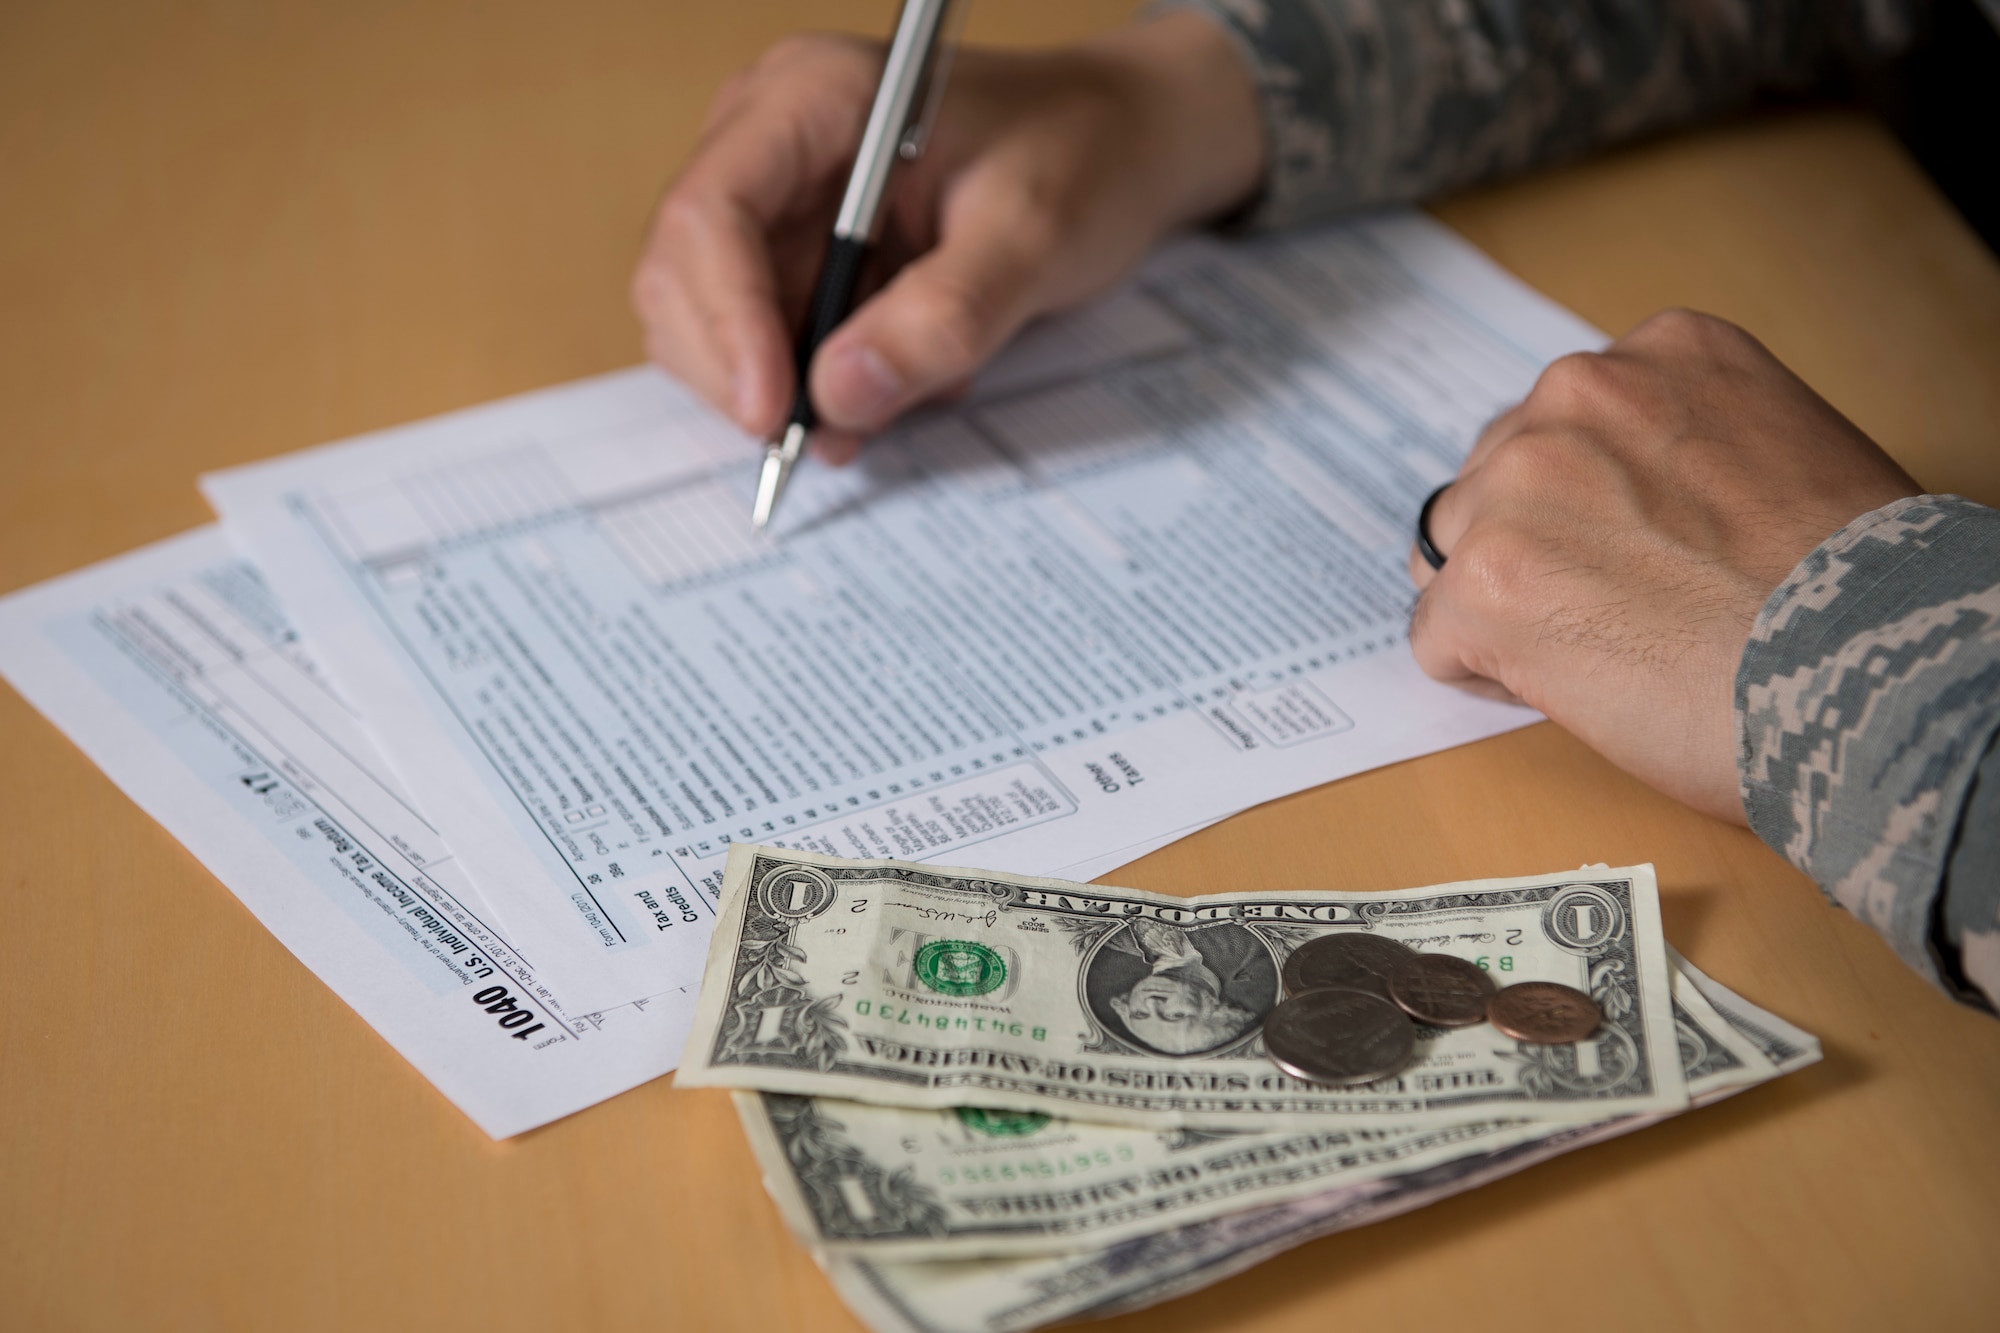 Filling taxes in an overseas location can be intimidating; luckily the tax center at Yokota Air Base provides free help for filling taxes. For more information and to set up appointments contact the base Legal Office at 225-
4927.